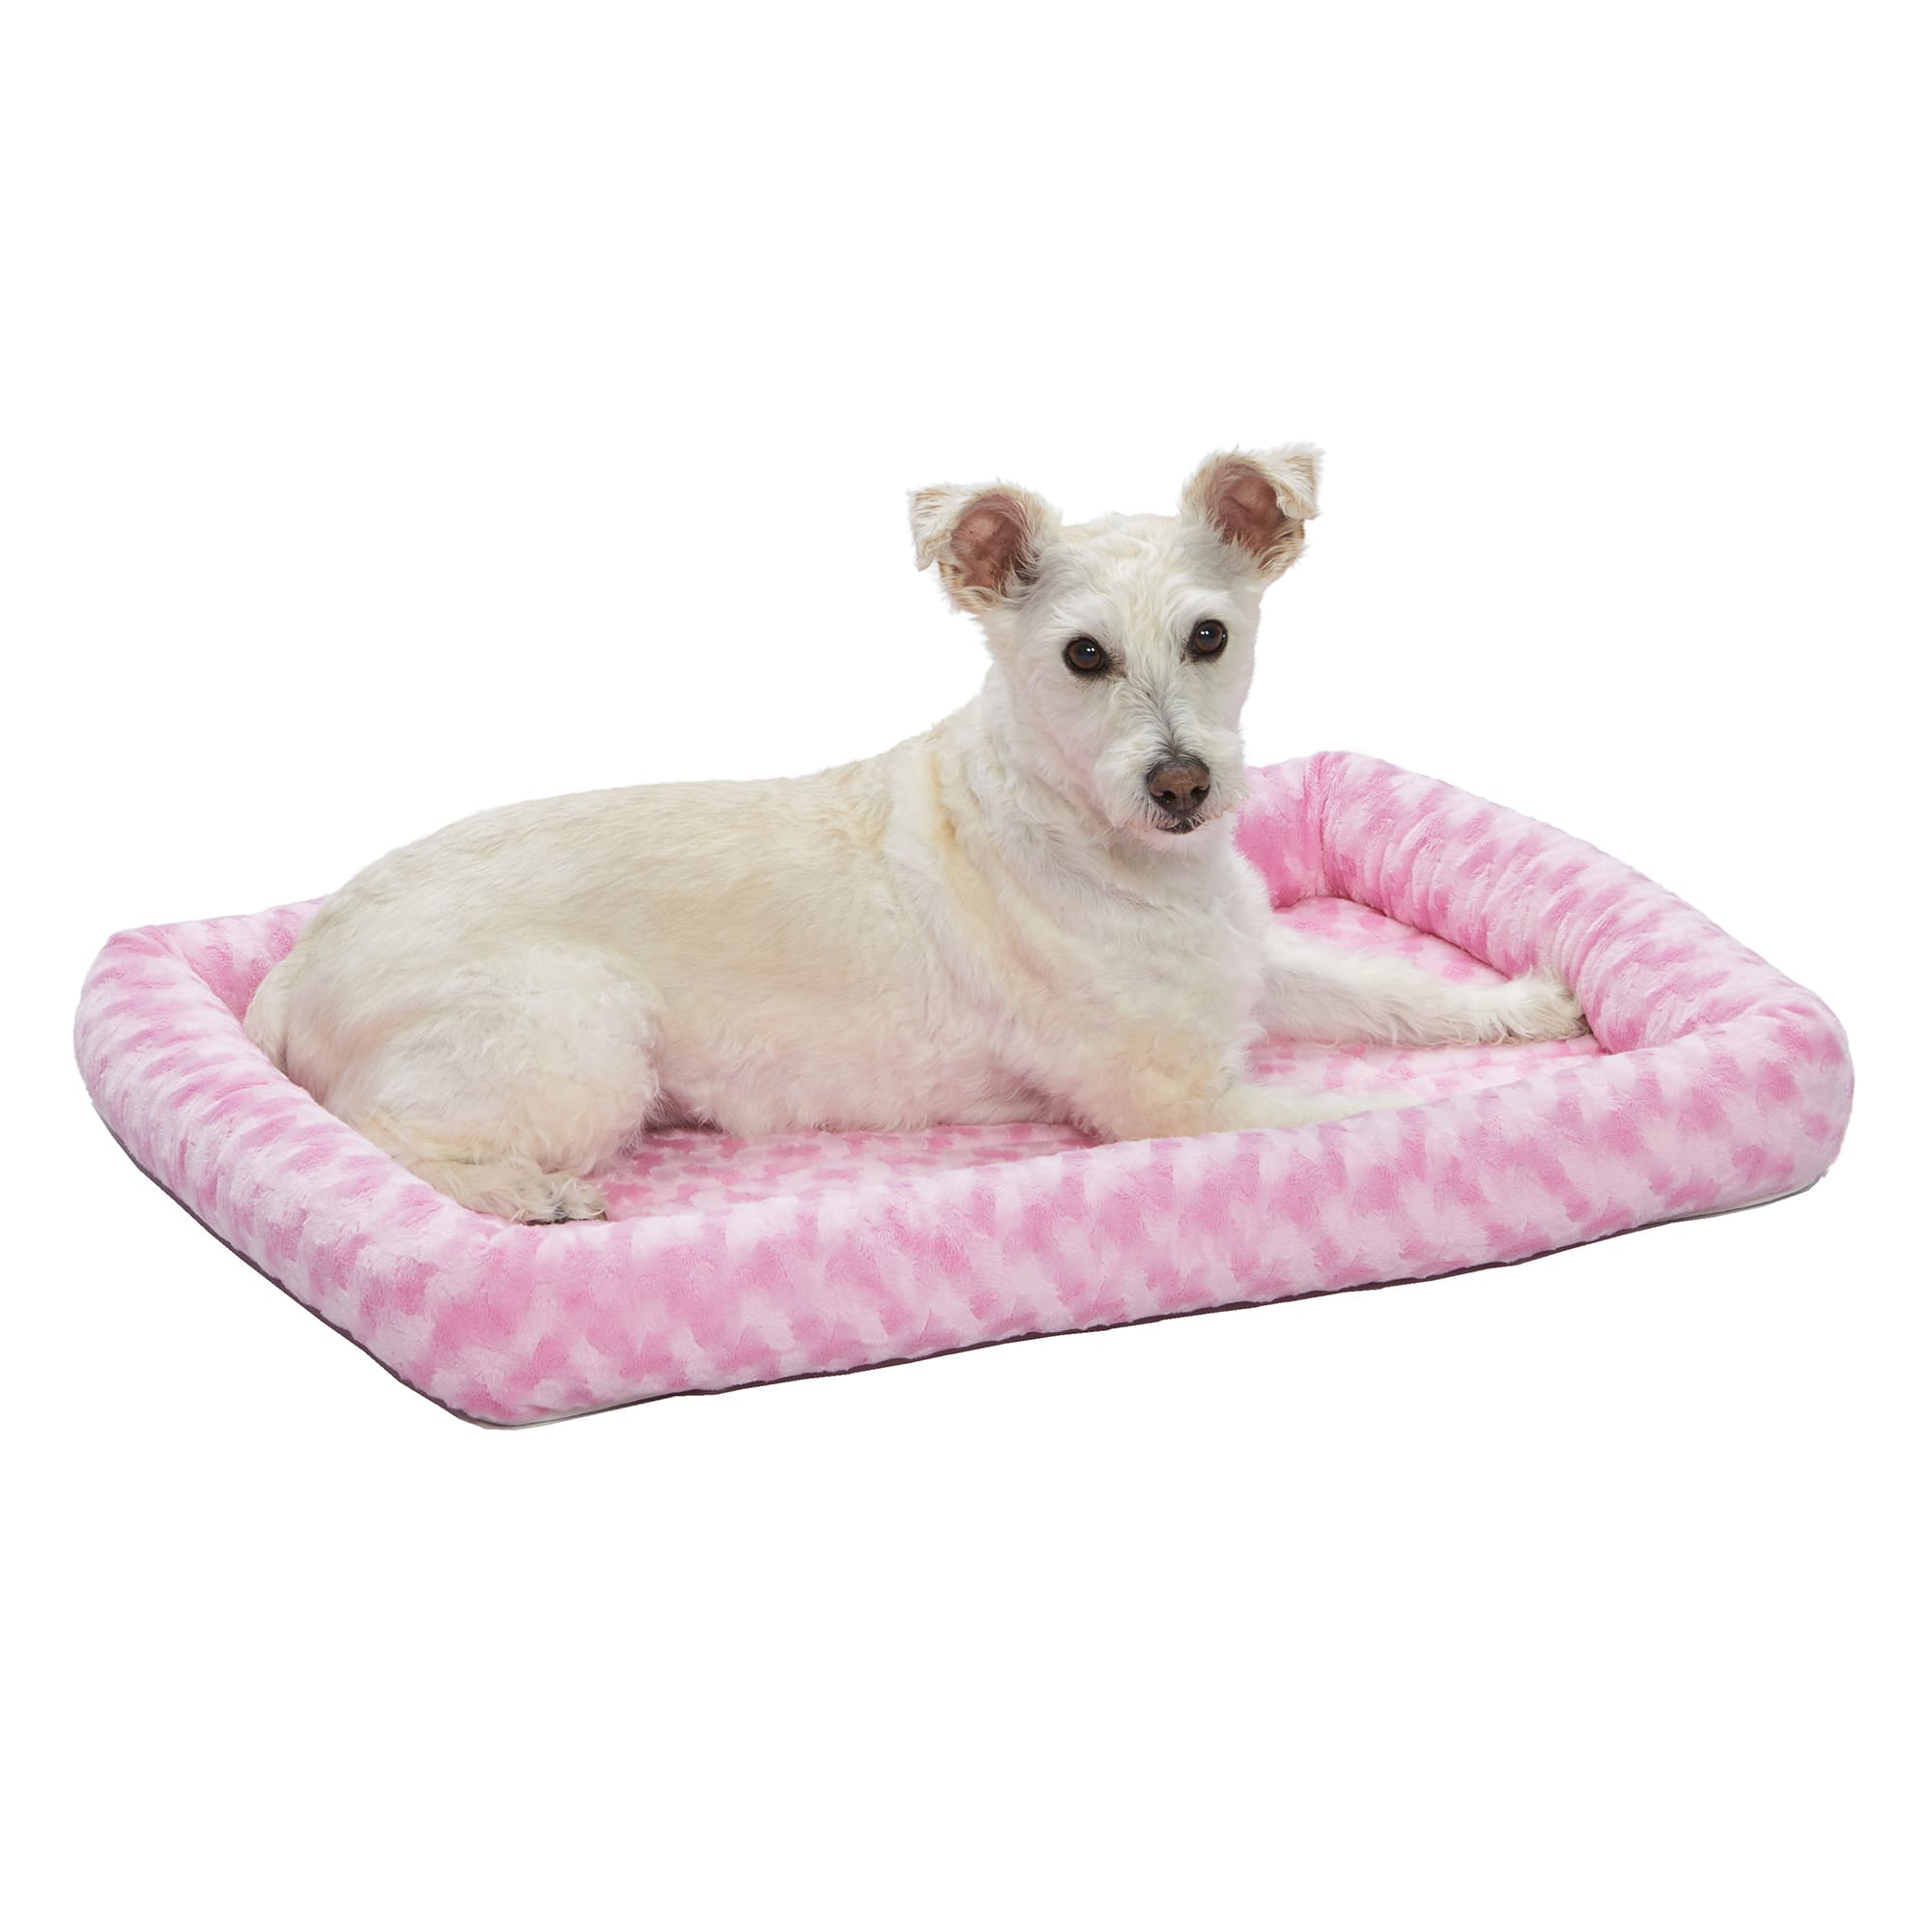 Photos - Dog Bed / Basket Midwest Quiet Time Bolster Pink Dog Bed, 30" L X 21" W, Medium, Pi 